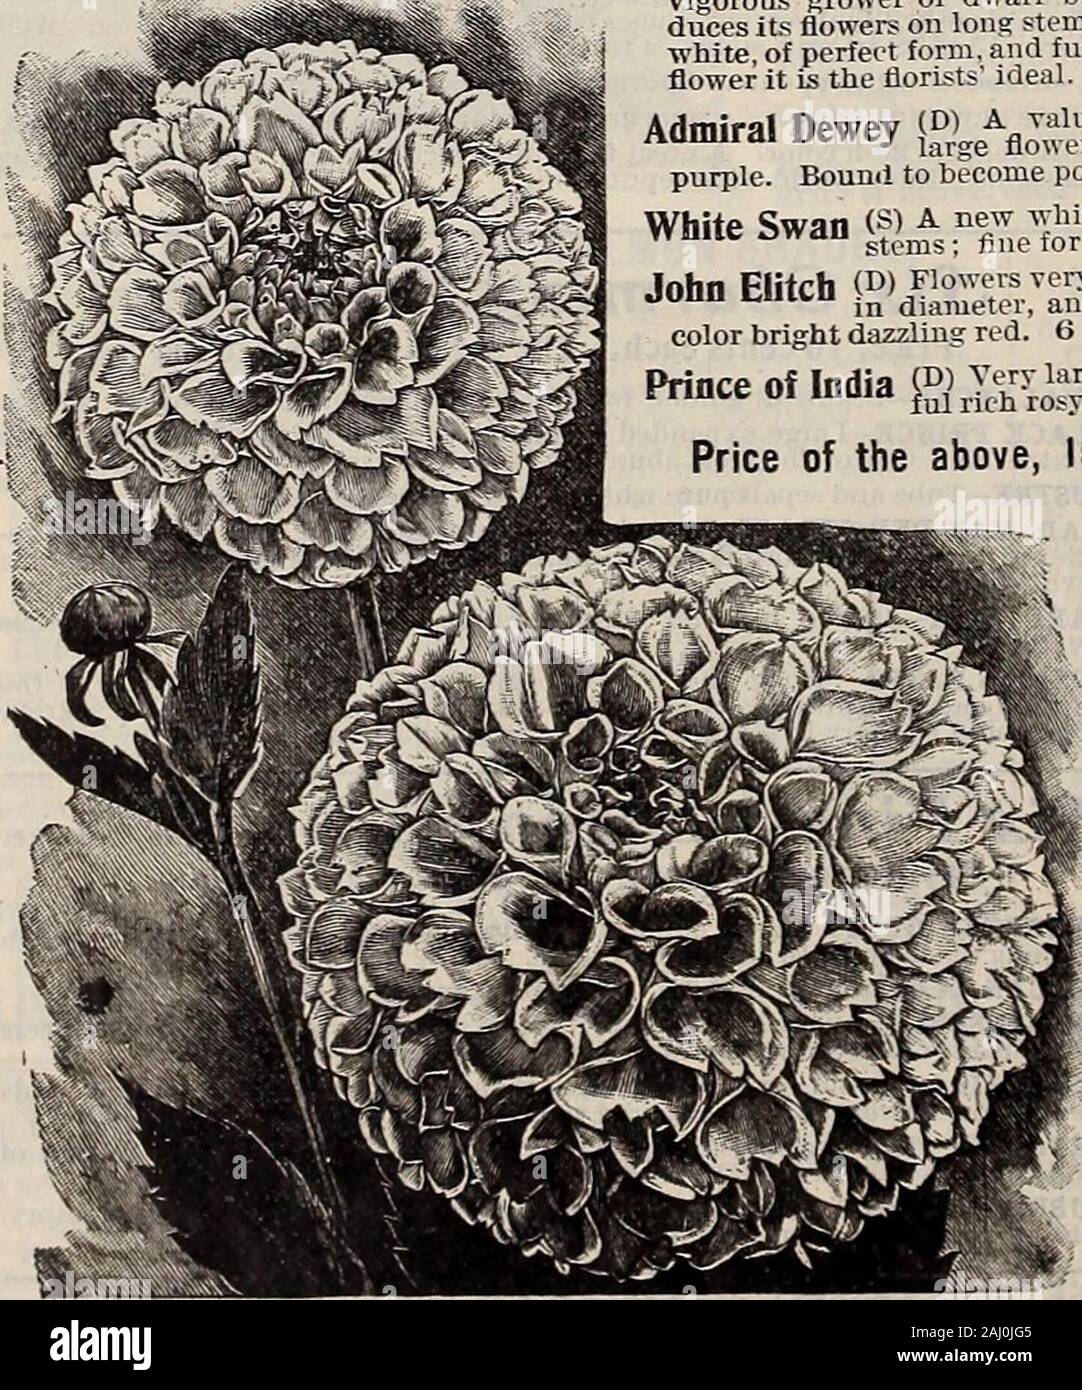 Livingston's seeds : 1902 'true blue' annual . d good pot-grown plants. Prices on all Dahlias are postpaid, unless otherwise quoted. CLIFFORD W. BRUTON. riiffnrrt W Rriltnn The finest yellowCllttOra W. DfUIOn decorative CactusDahlia vet produced. Flowers verylarge, perfectly full; in color a solidpure vellow, verv clear and rich, borneon vtrv long, graceful stems : of greatvalue for cutting. Robust grower andprofuse bloomer. ) This new snow-white ahlia is ex-a profu&gt;e and constant bloomer, strong,vigorous grower of dwarf branching habit, and pro-duces its flowers on long stems. The flowers Stock Photo